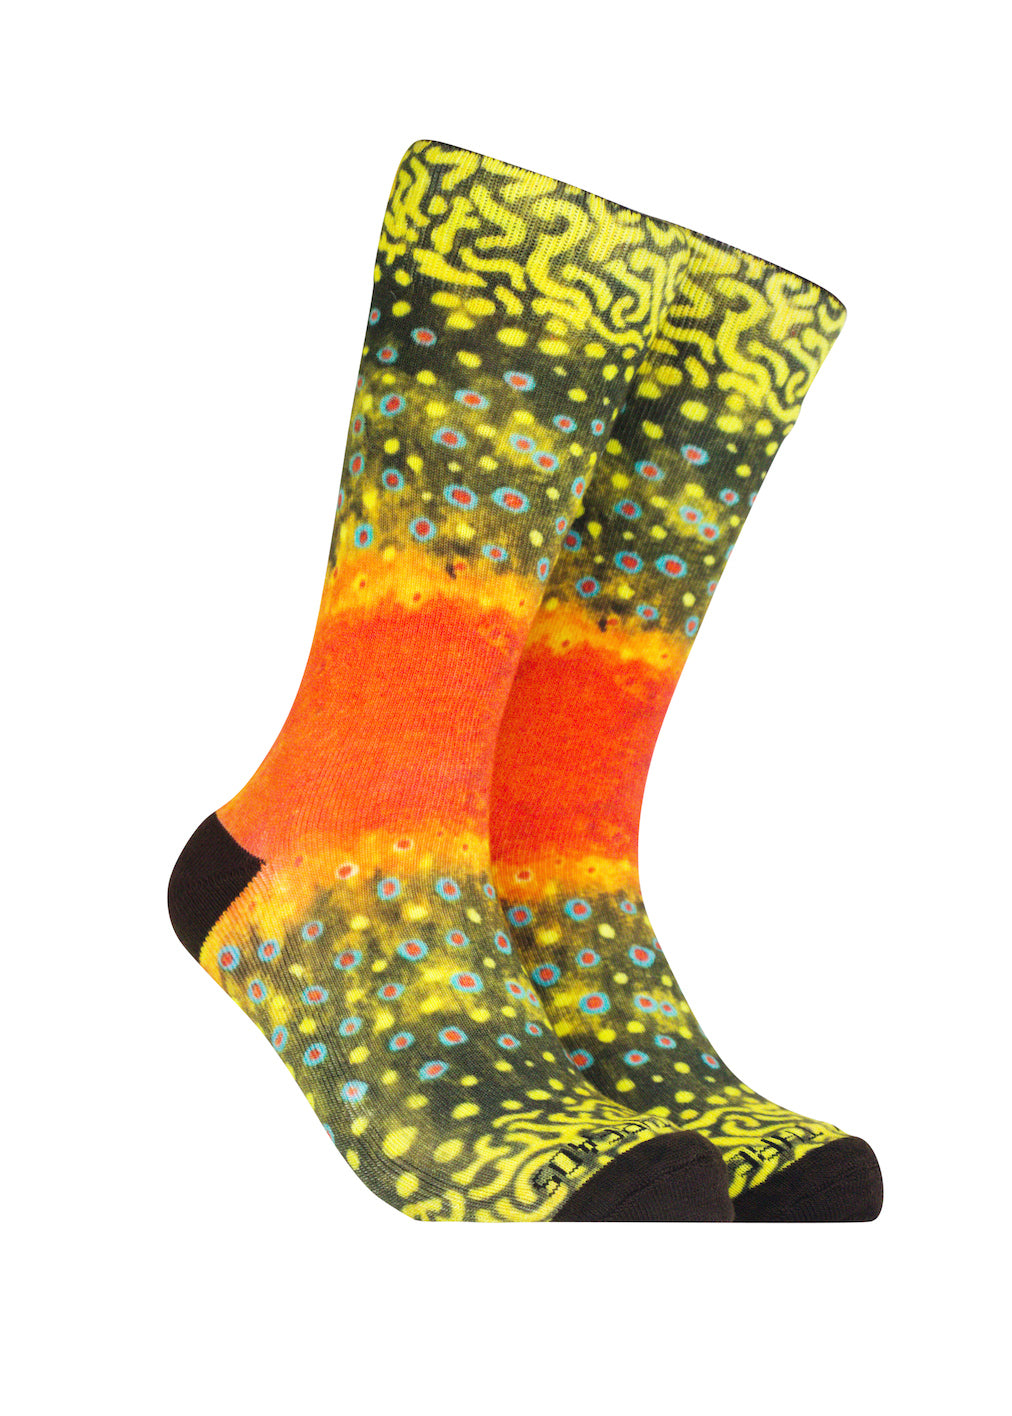 Brook Trout Socks - Fish Patterned Clothing- Gifts for Anglers